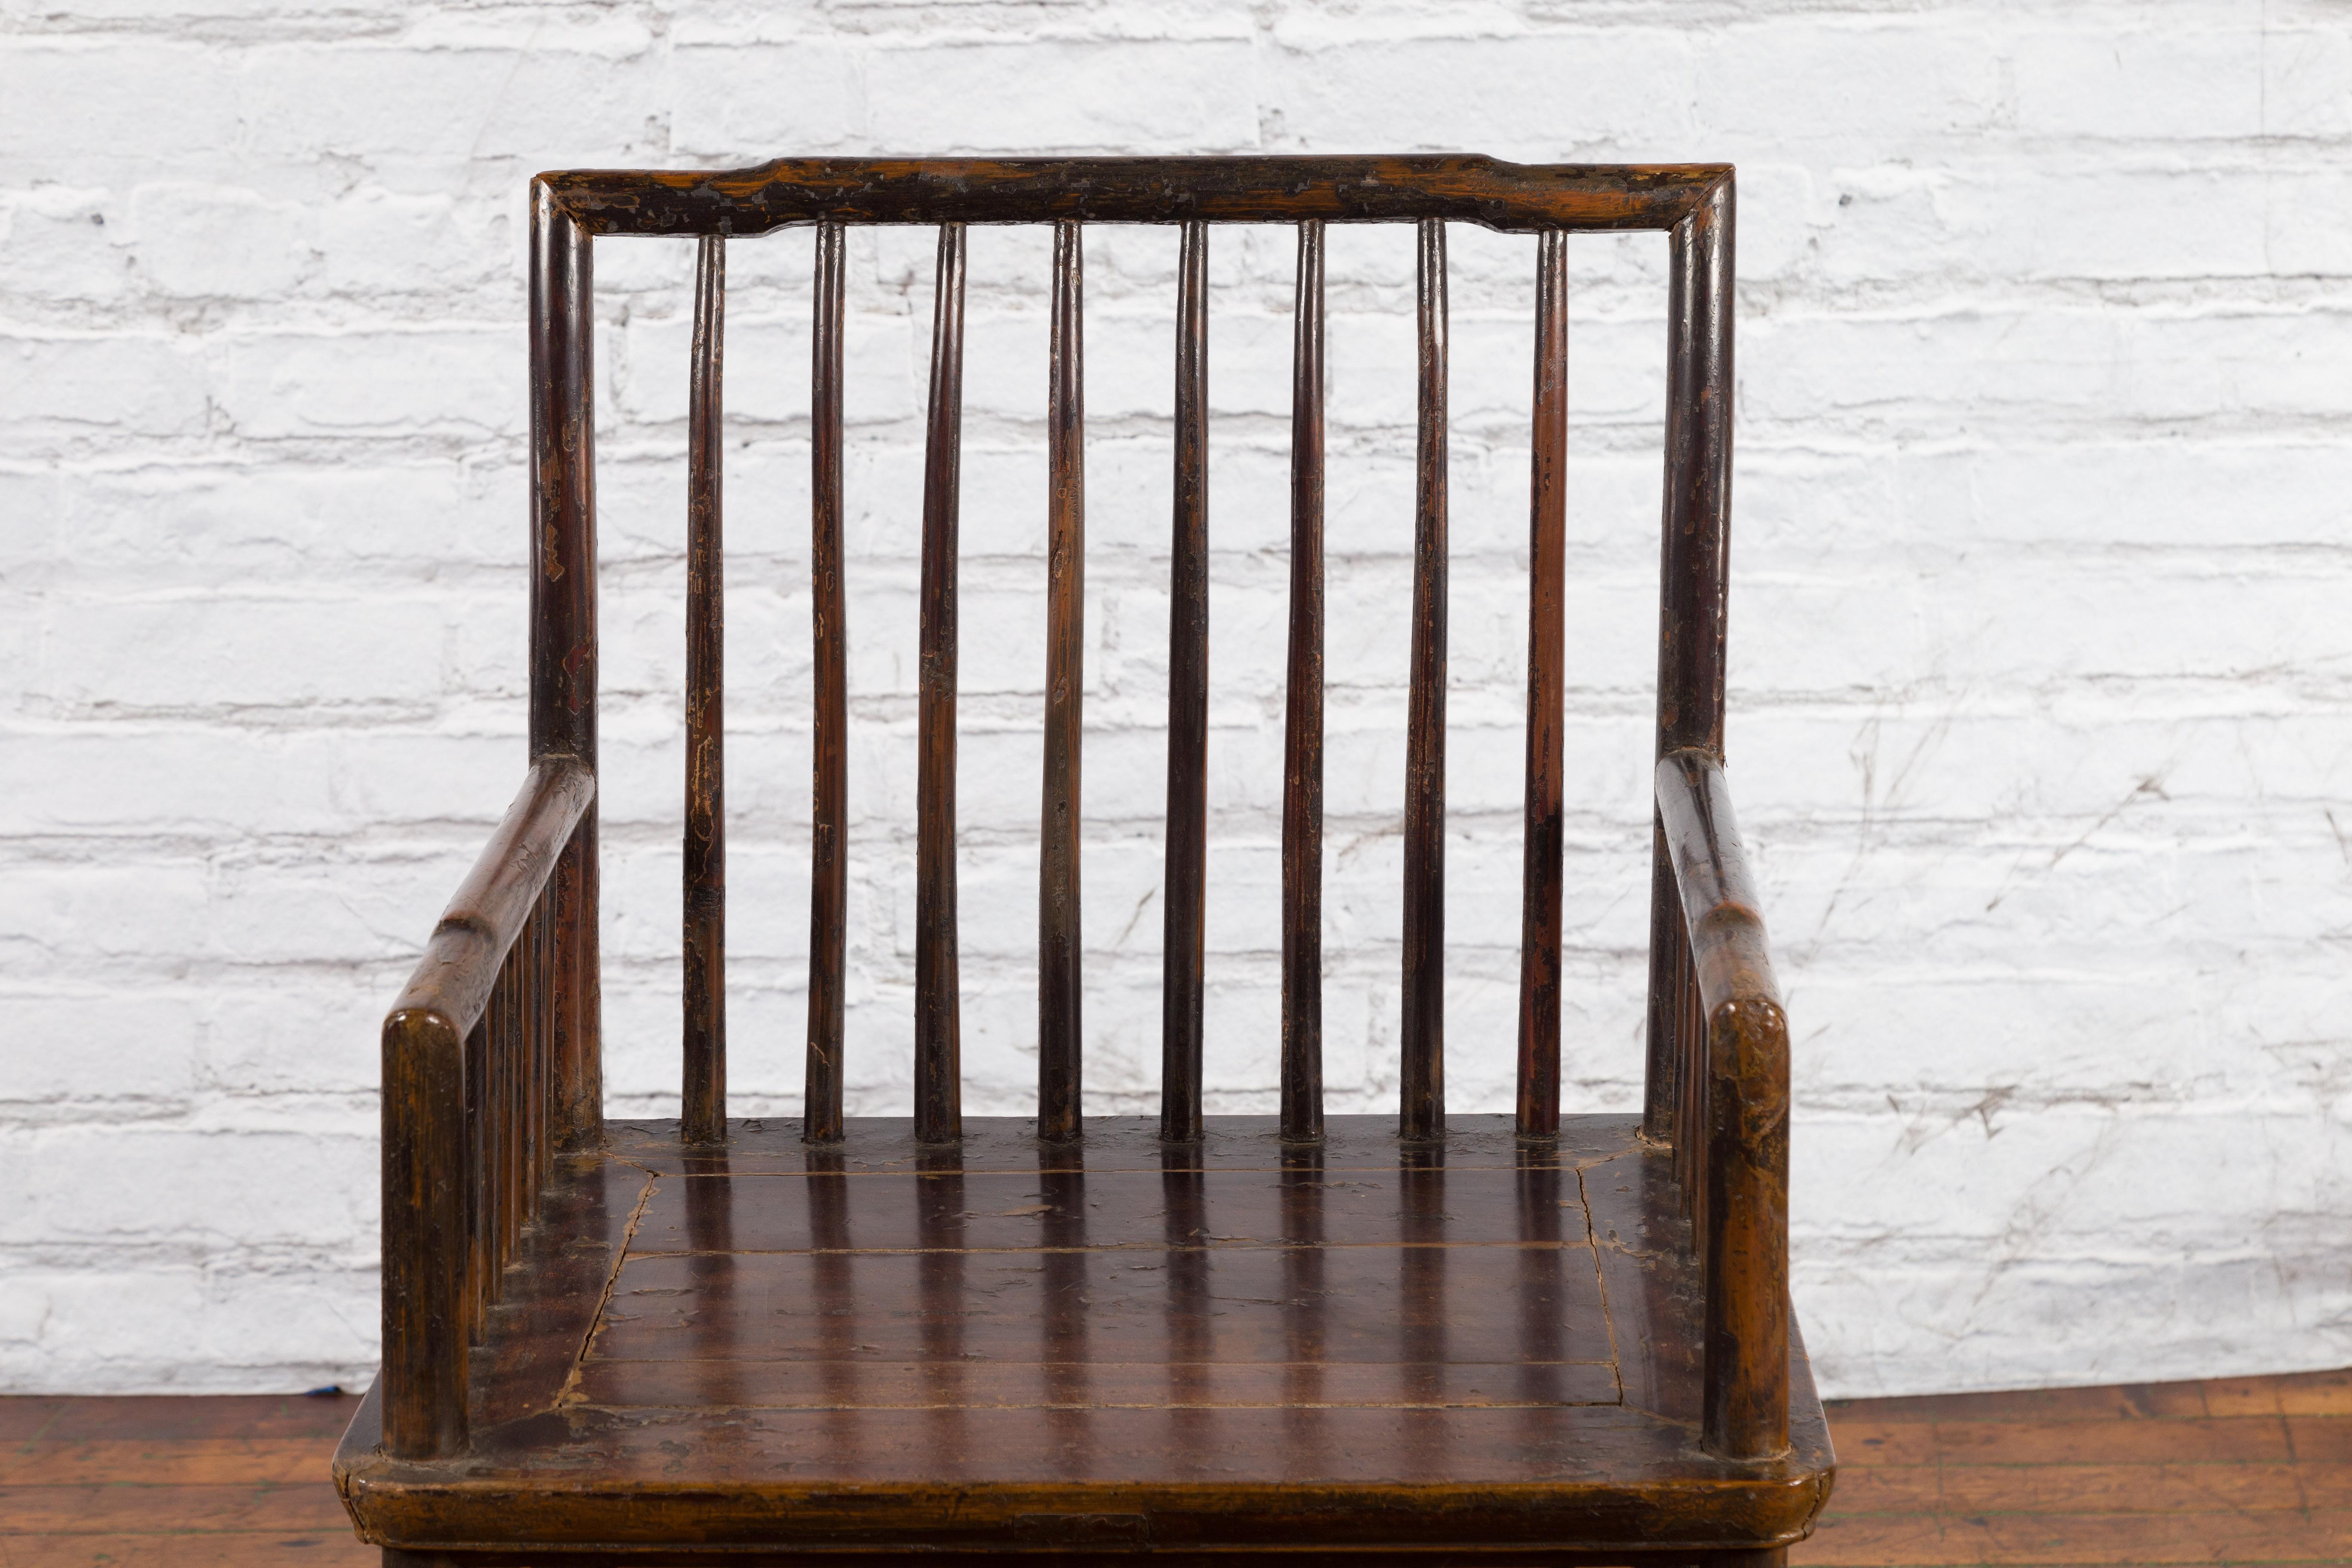 Chinese Qing Dynasty 19th Century Elmwood Armchair with Slatted Back and Arms For Sale 6